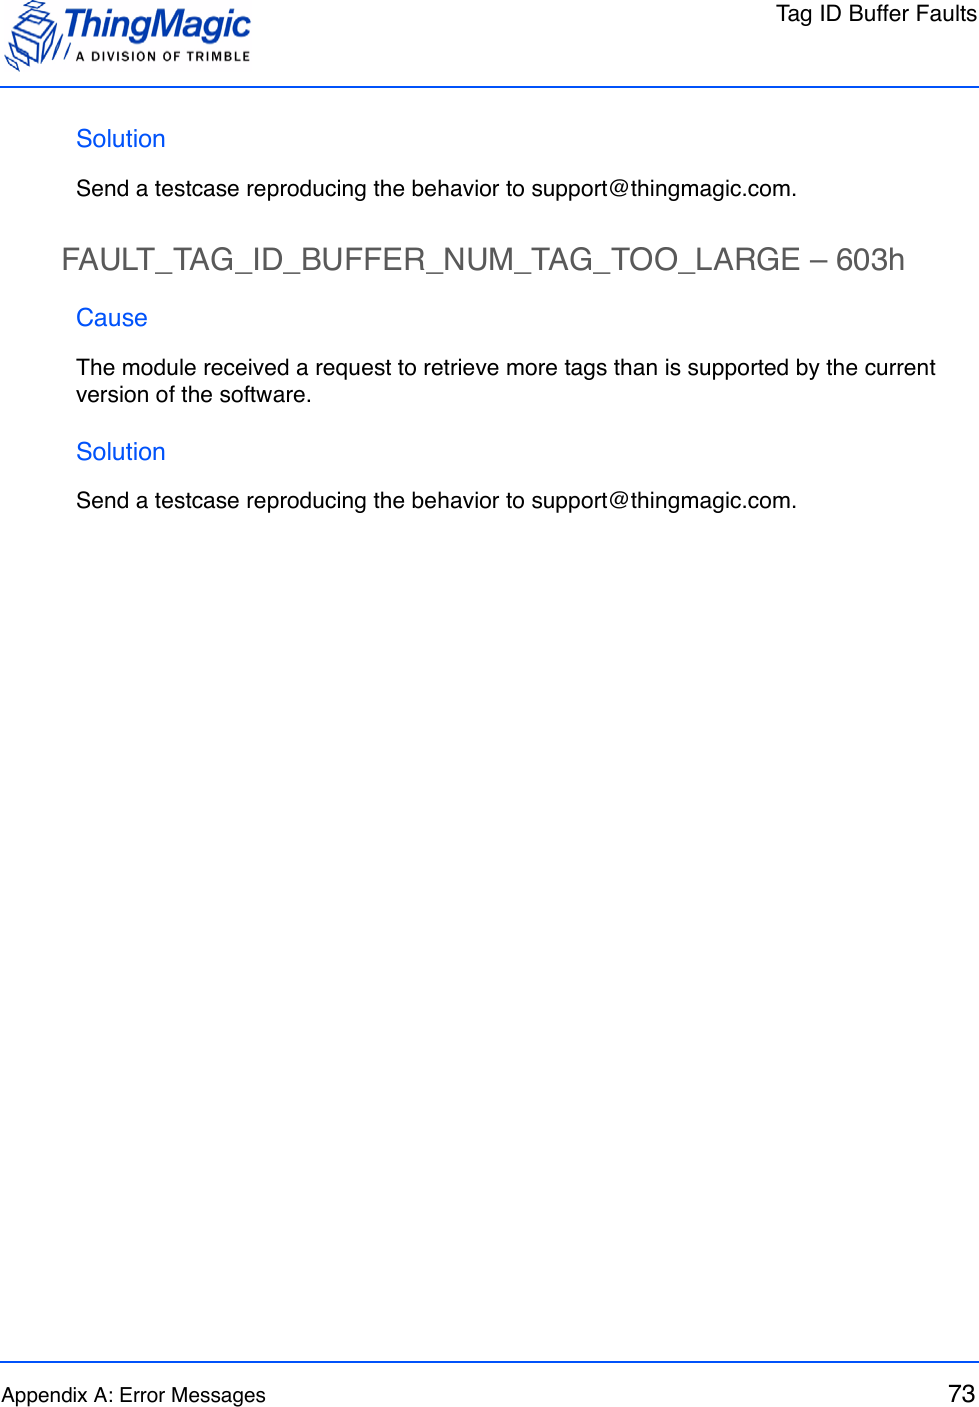 Tag ID Buffer FaultsAppendix A: Error Messages 73SolutionSend a testcase reproducing the behavior to support@thingmagic.com.FAULT_TAG_ID_BUFFER_NUM_TAG_TOO_LARGE – 603hCauseThe module received a request to retrieve more tags than is supported by the current version of the software.SolutionSend a testcase reproducing the behavior to support@thingmagic.com.